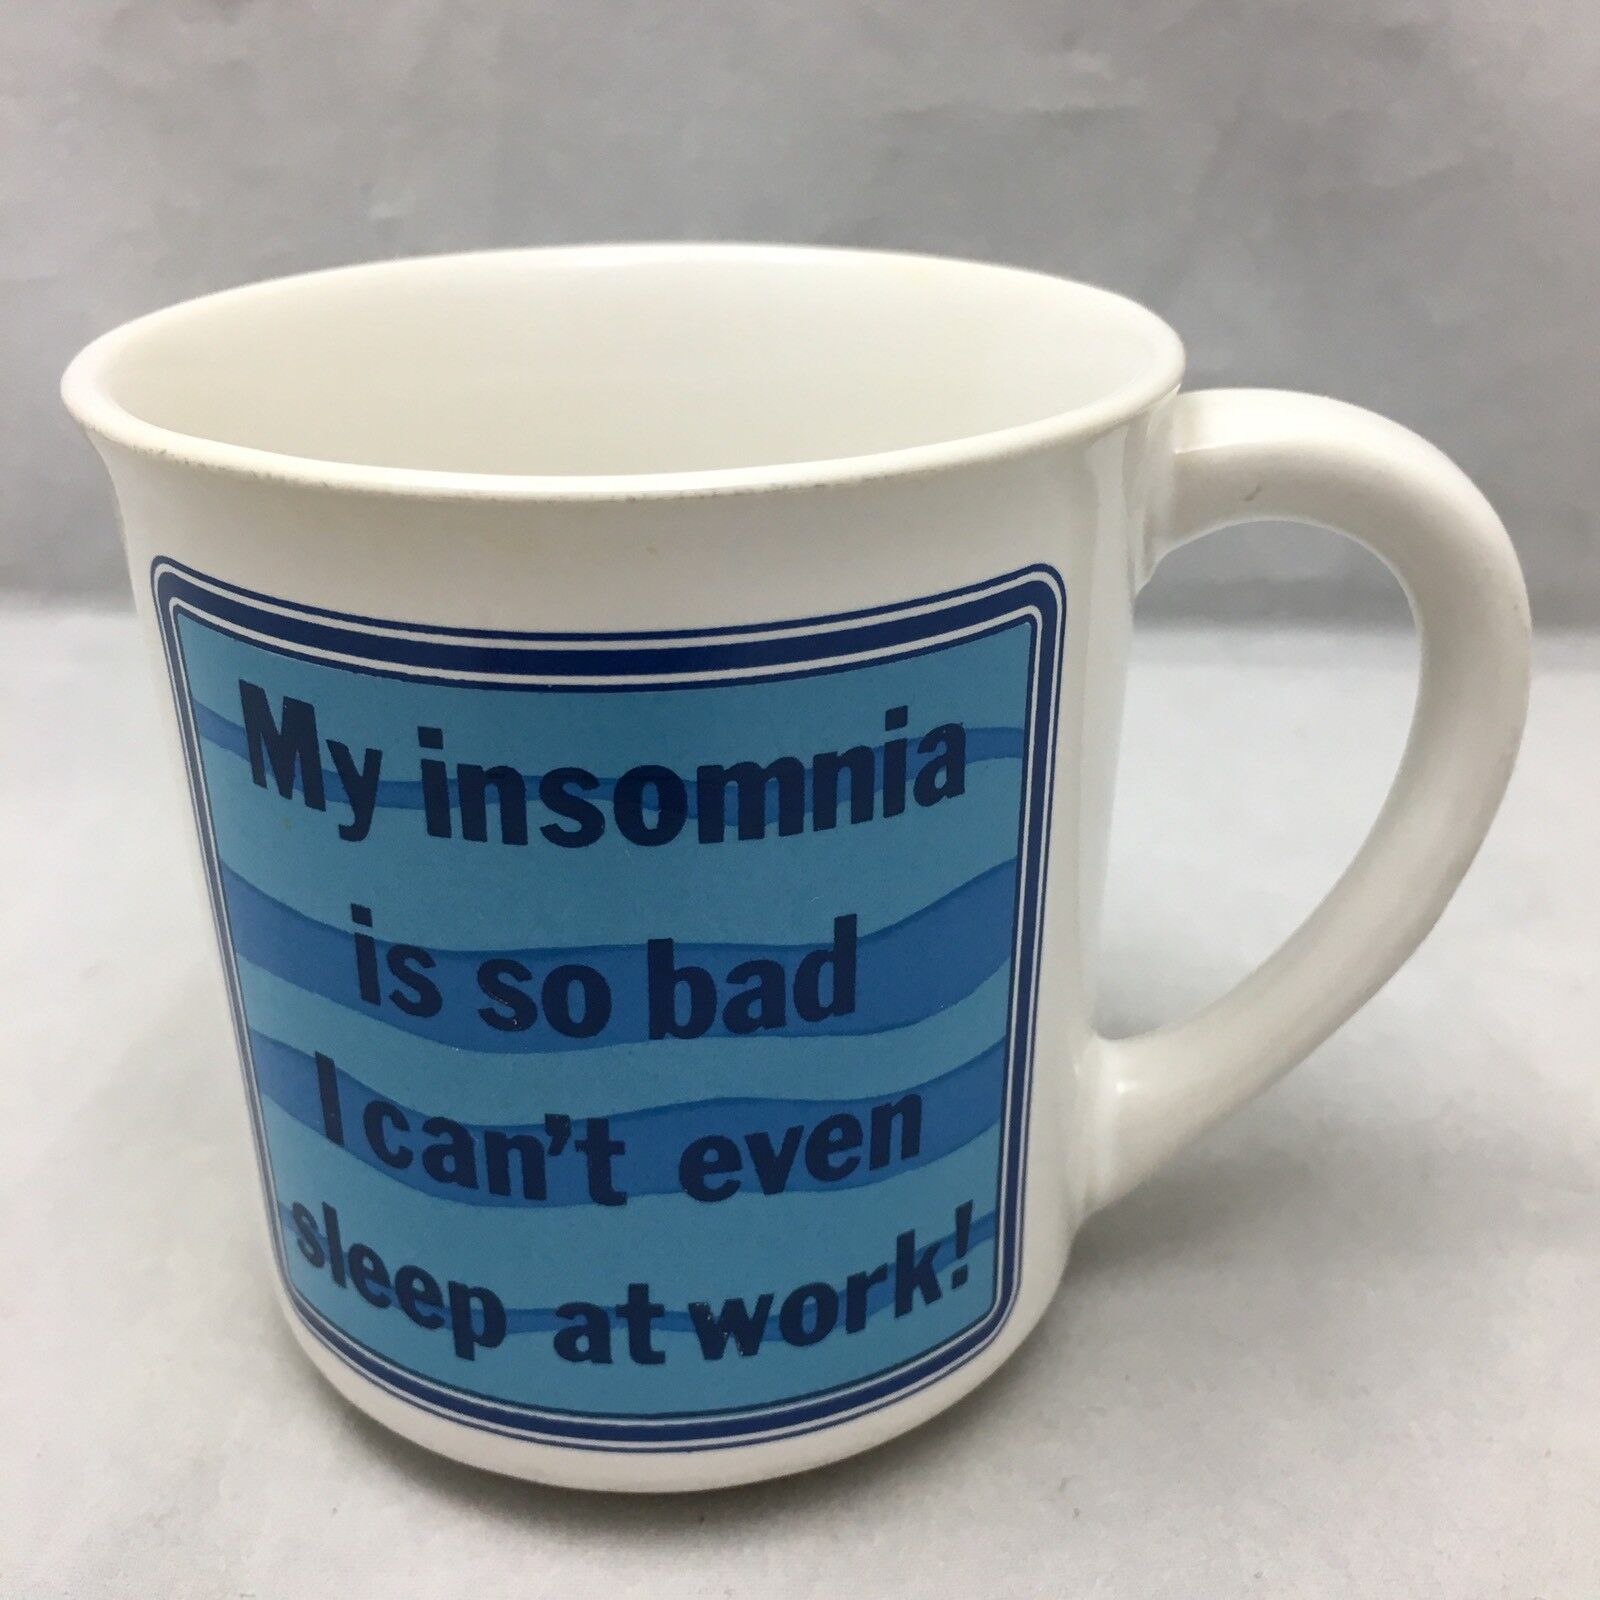 My Insomnia Coffee Mug Is So Bad I Can\'t Even Sleep At Work Blue Black White Cup